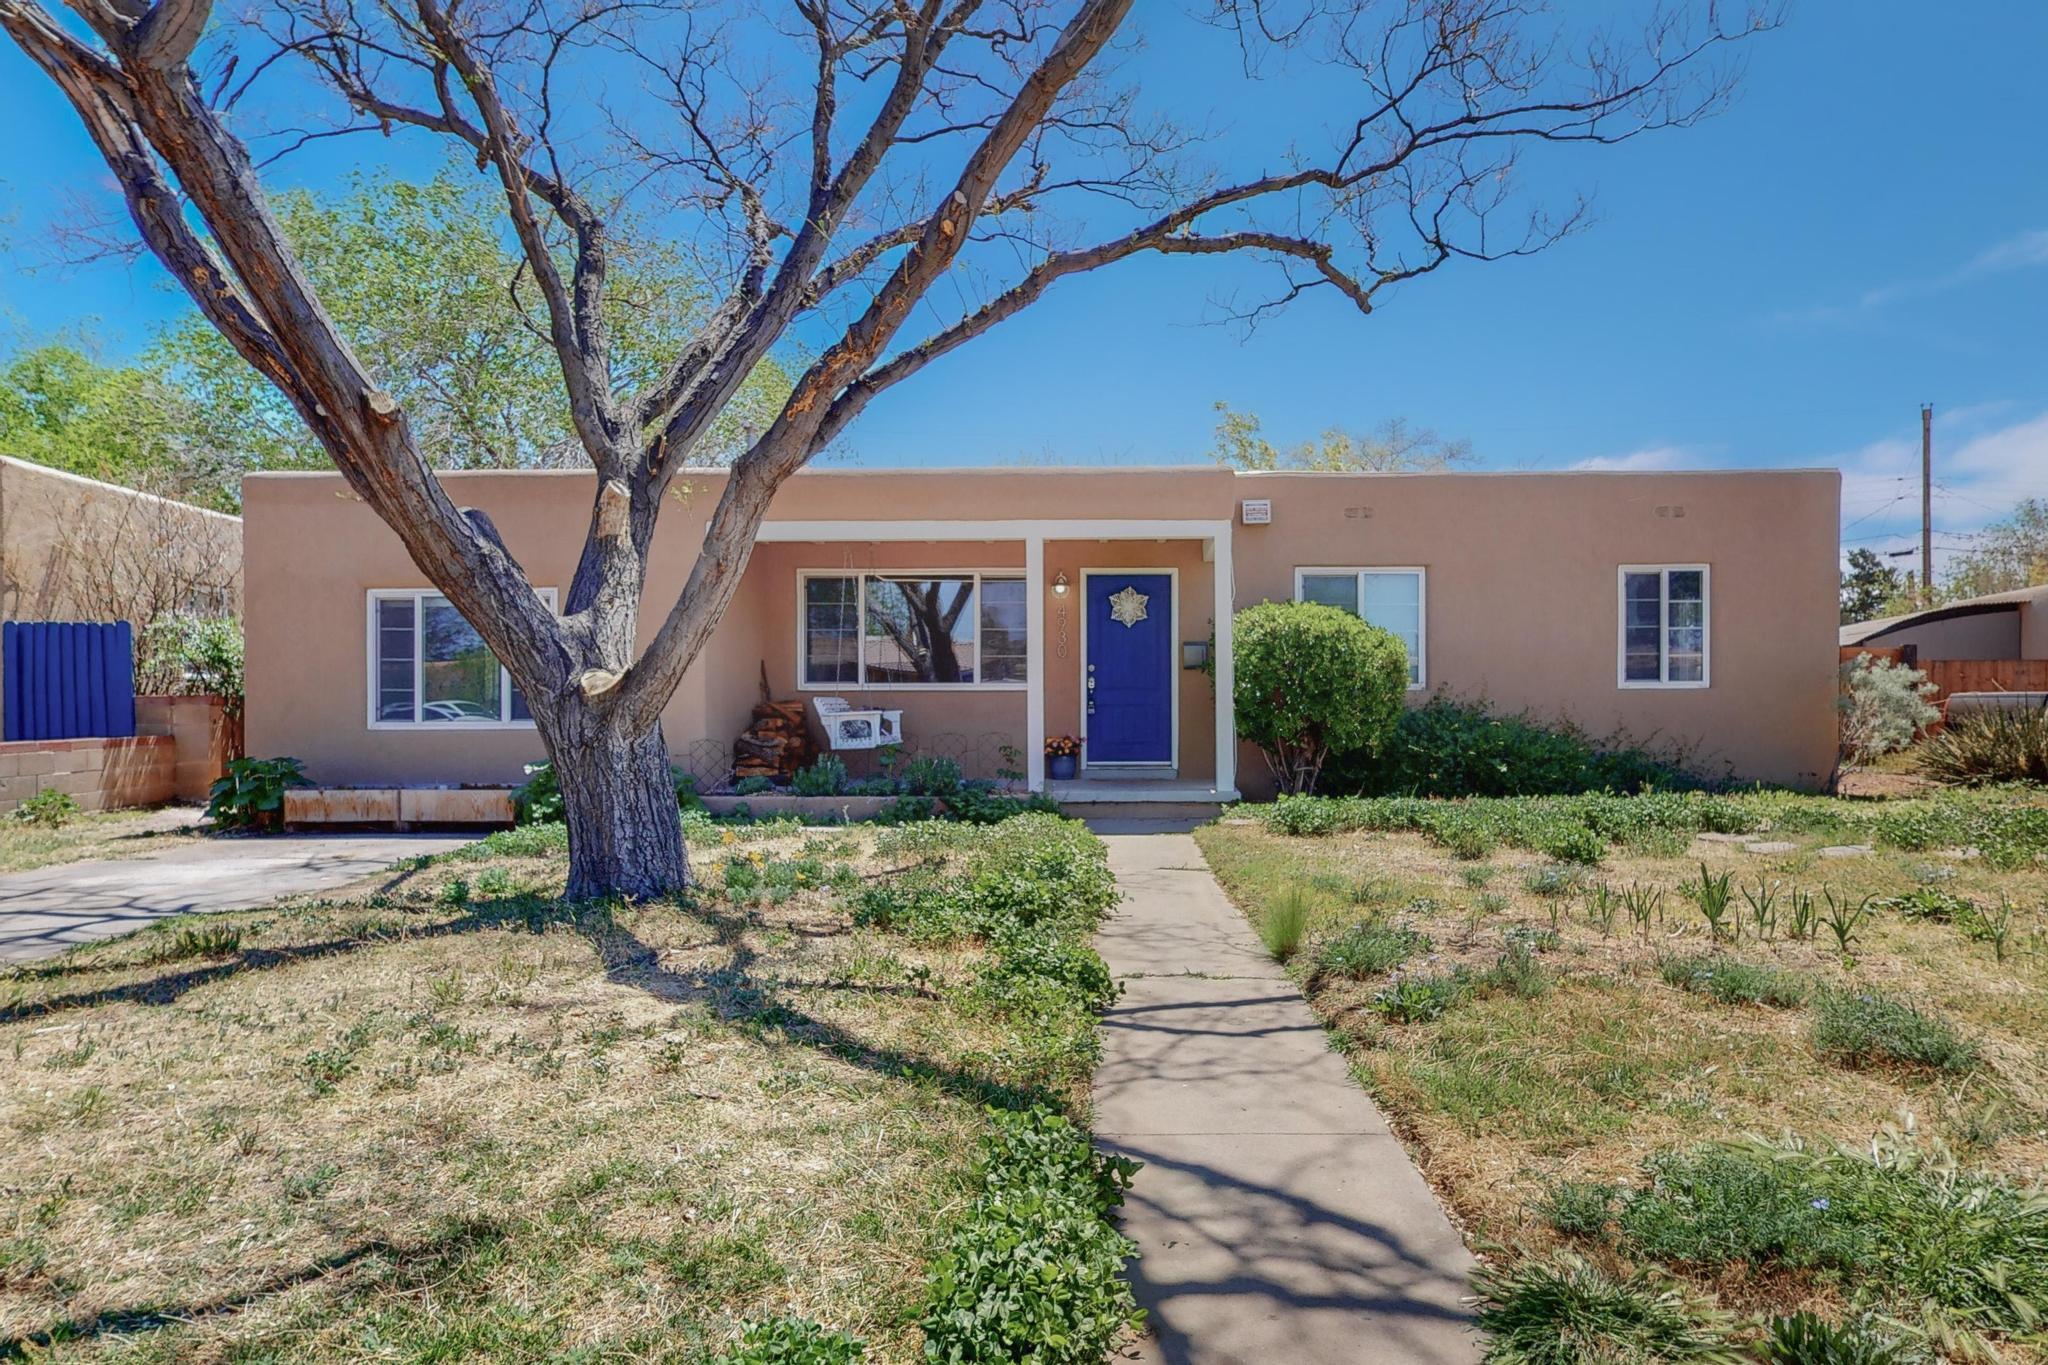 Welcome to this lovely S. UNM home! Inside you'll find hardwood, tile & laminate flooring, fresh paint, updated windows, curved archways, and plenty of room. Both bathrooms have been updated in the last 5 years. There are 2 living areas, 1 w/ a fireplace for cozy evenings, and 1 could be used as an office. The owners used the large room in the back as their bedroom. Its also a  great space for a rec room, office, rental, or anything you imagine. Outside you'll find a  covered patio, large backyard and flowering locust, mimosa, & plums trees. Gate access on both sides leads you to the front yard where you'll find raised beds, amended garden soil and a lovely front porch complete with a swing. You might even find a carrot in the ground! Easy access to many places. Come see this one today!